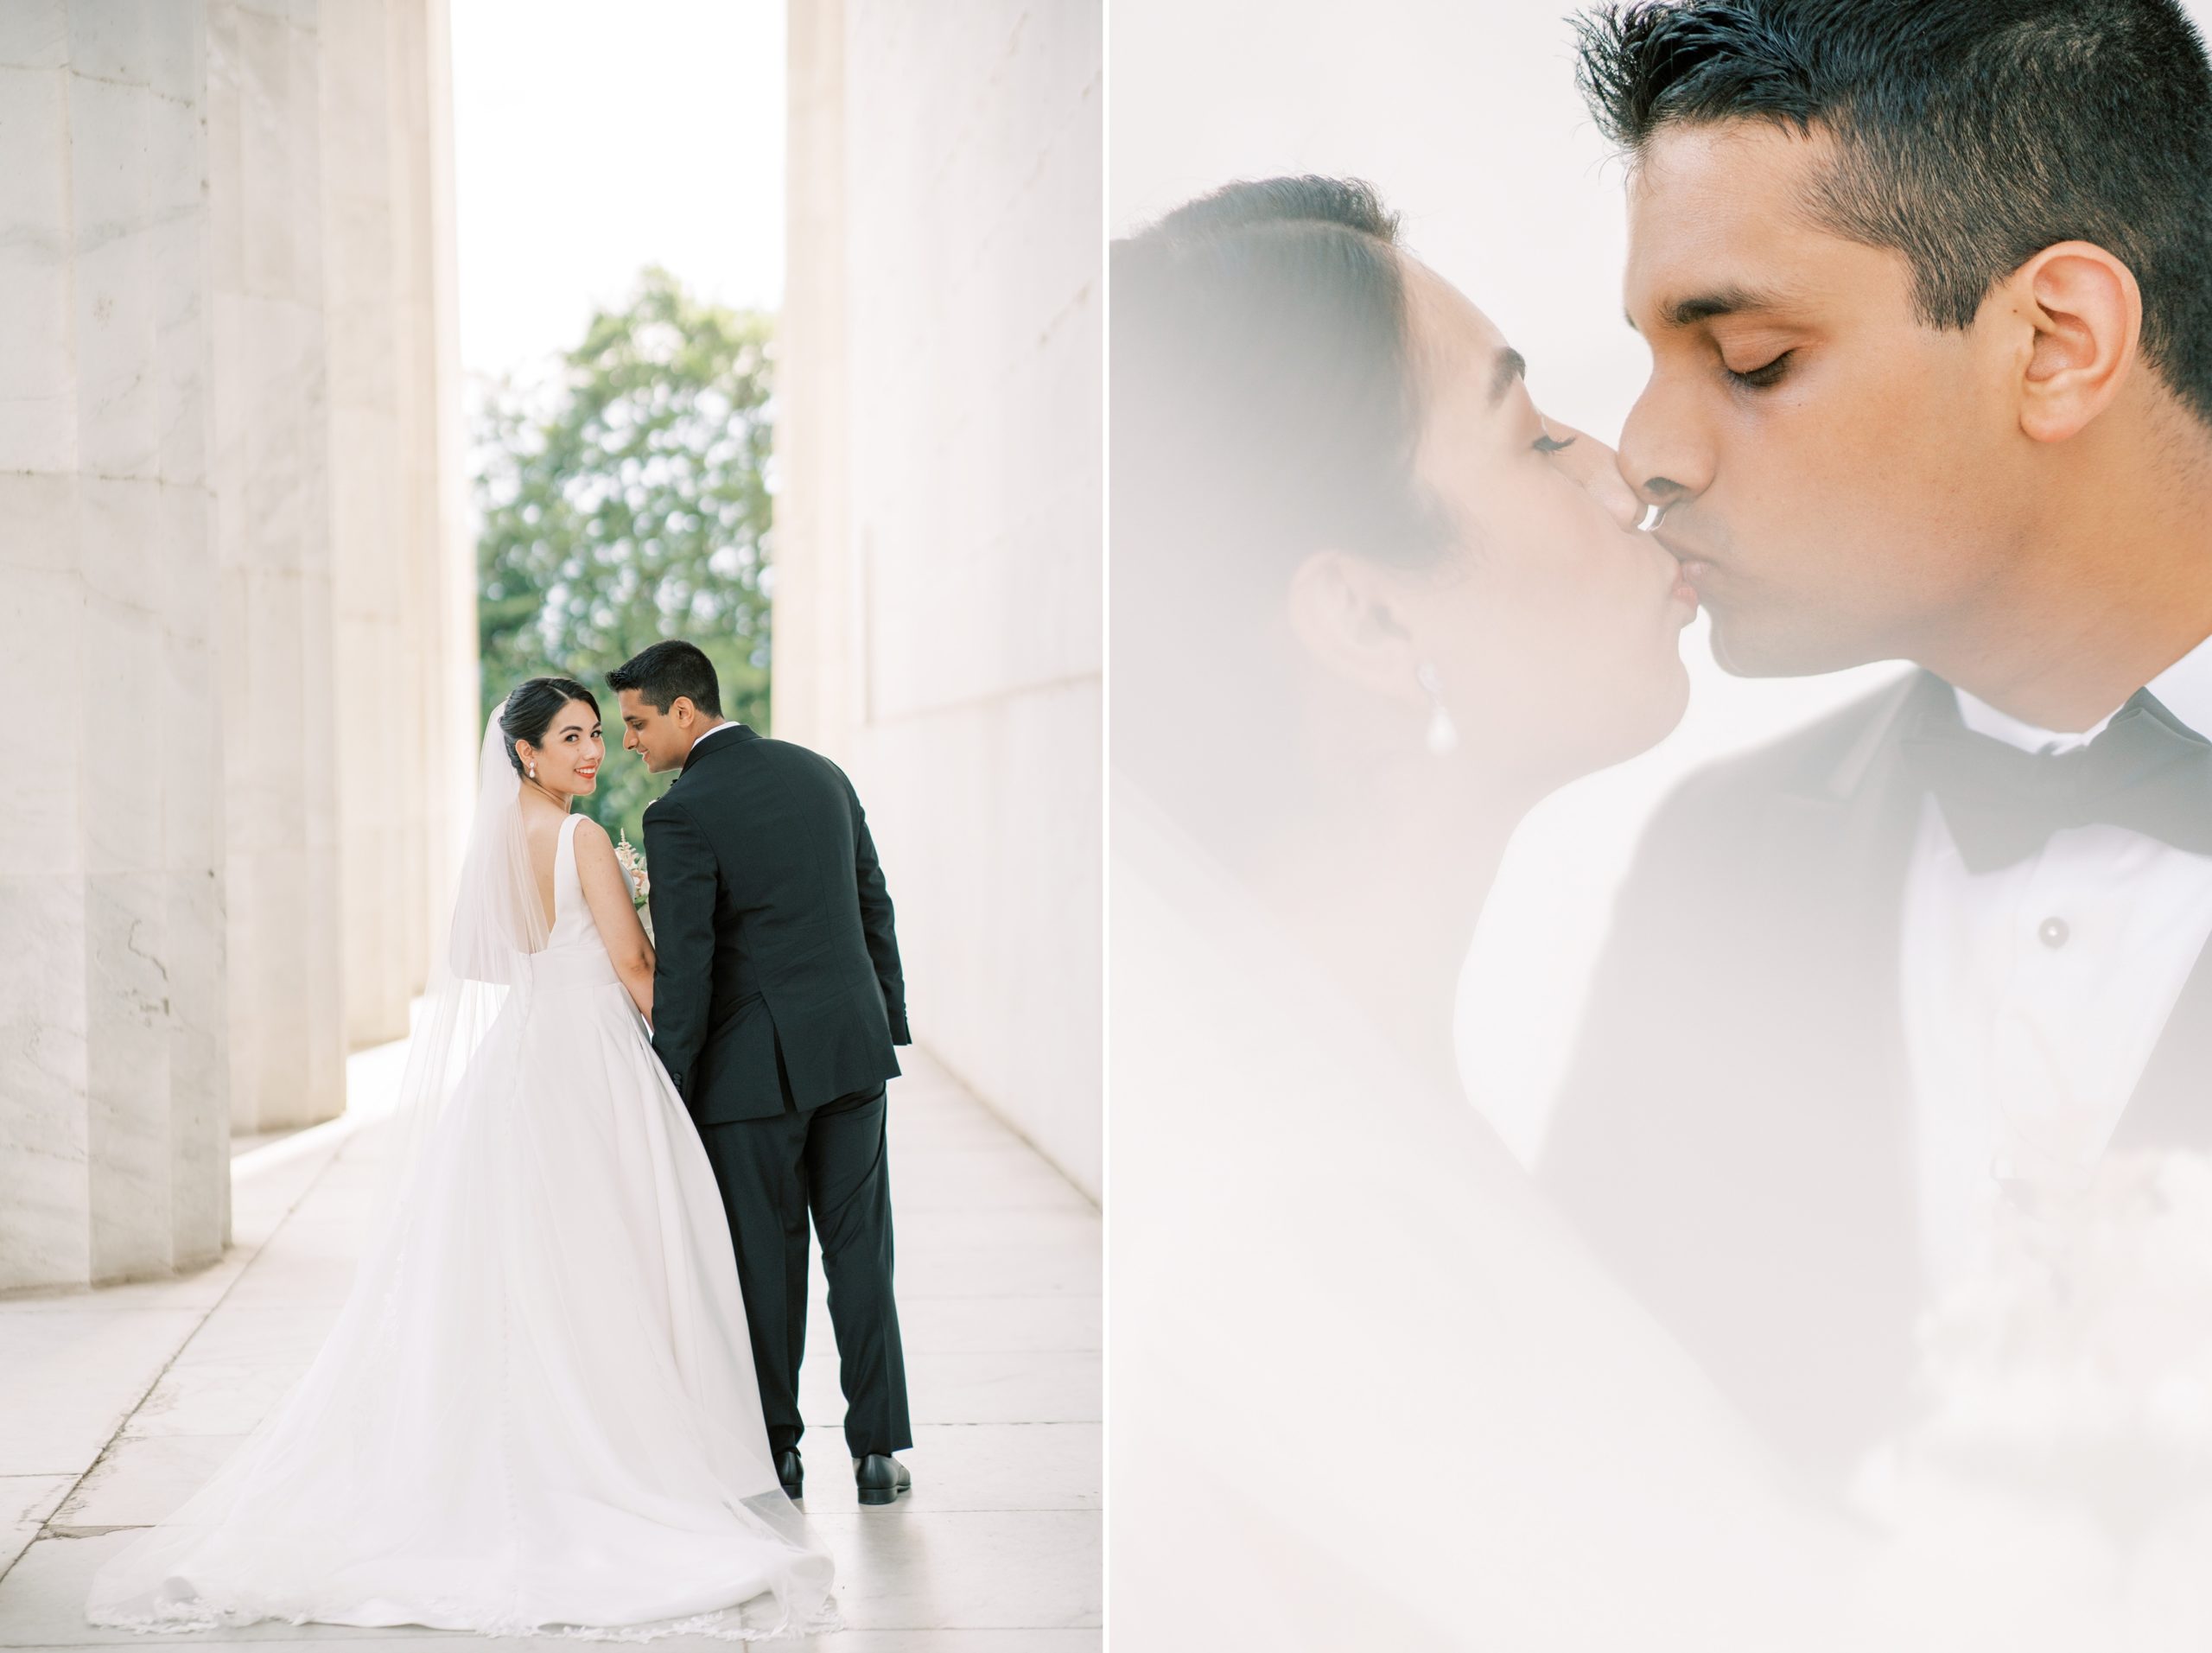 An intimate summer wedding in Washington, DC held at the iconic Army Navy Club with portraits at the Lincoln Memorial and White House.